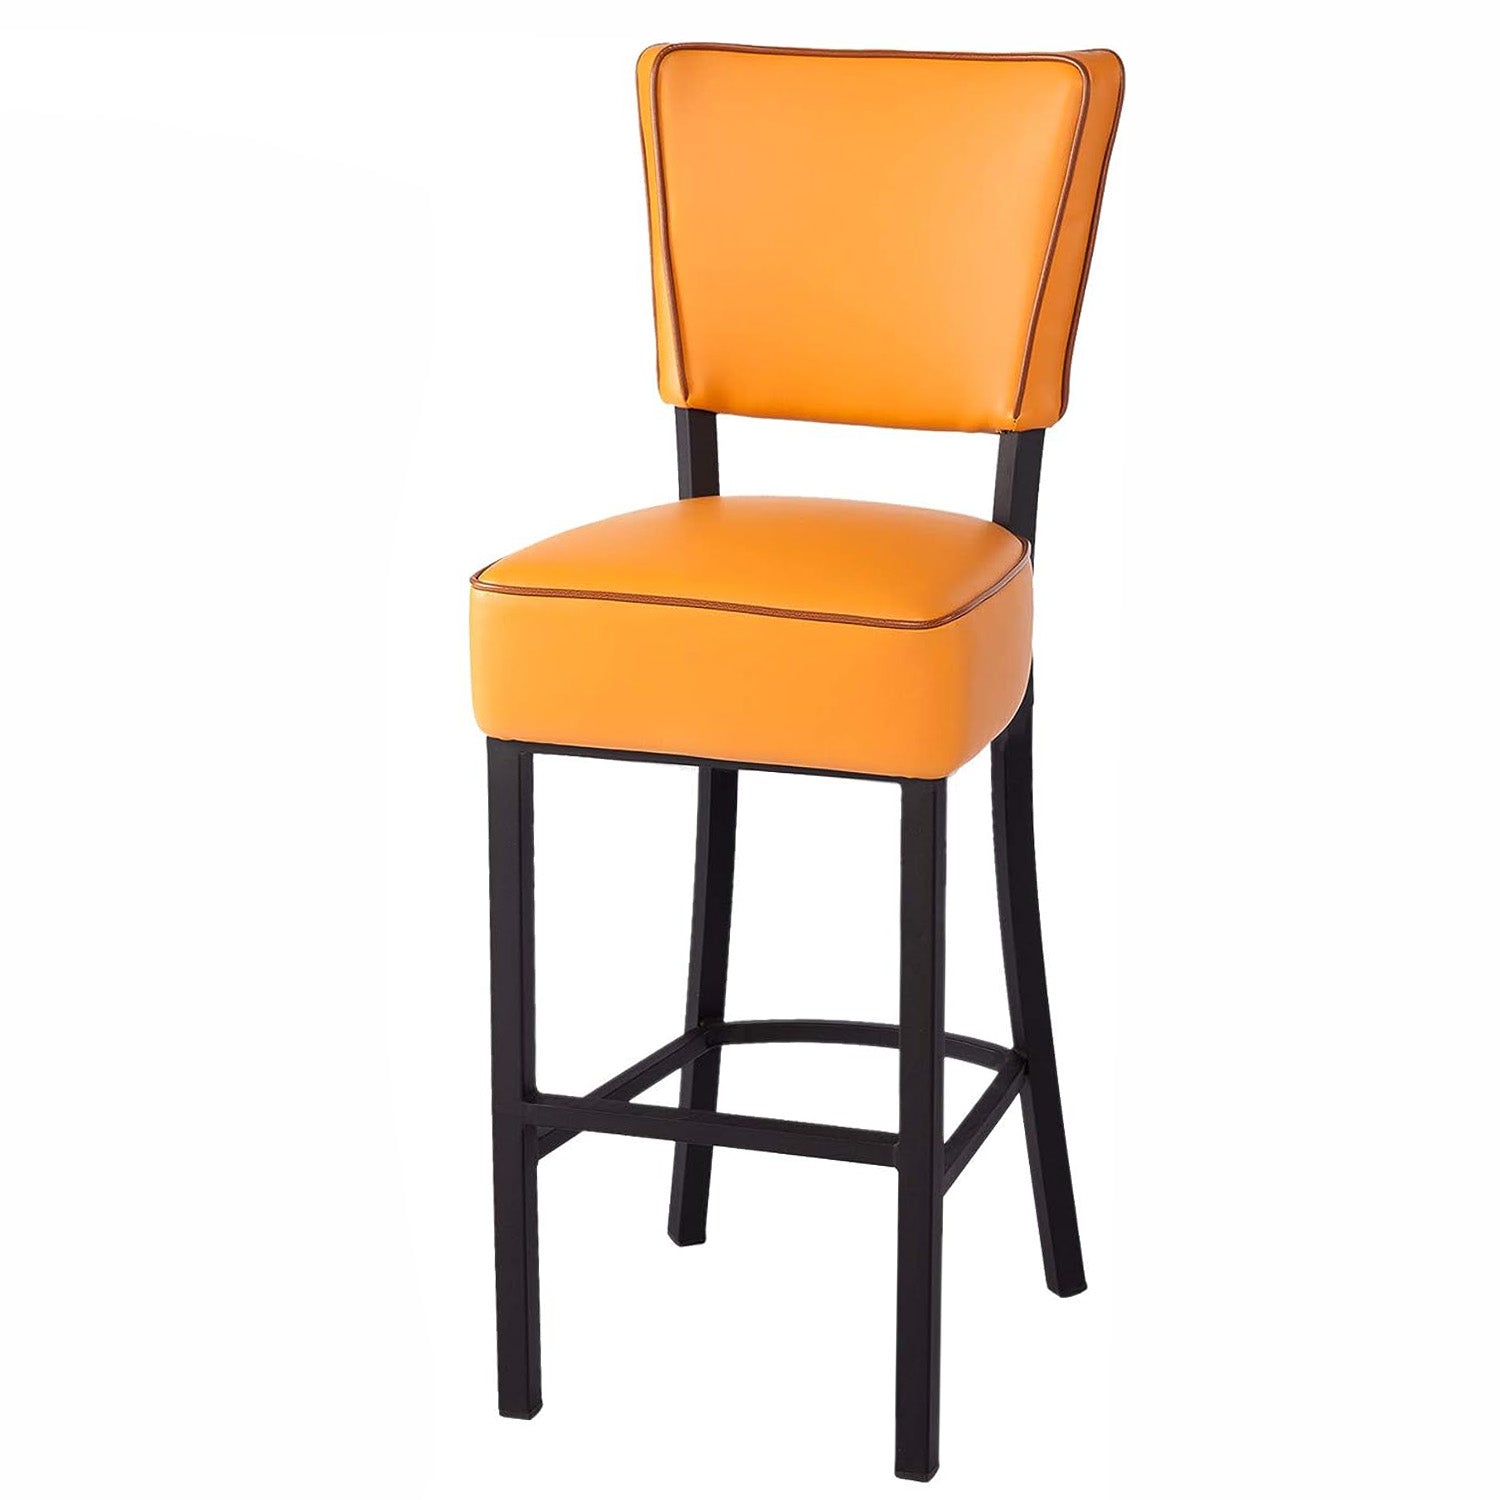 LUCKYERMORE 30” Upholstered Bar Stools Kitchen Chairs Counter Pub Leather Dining Chairs, Orange